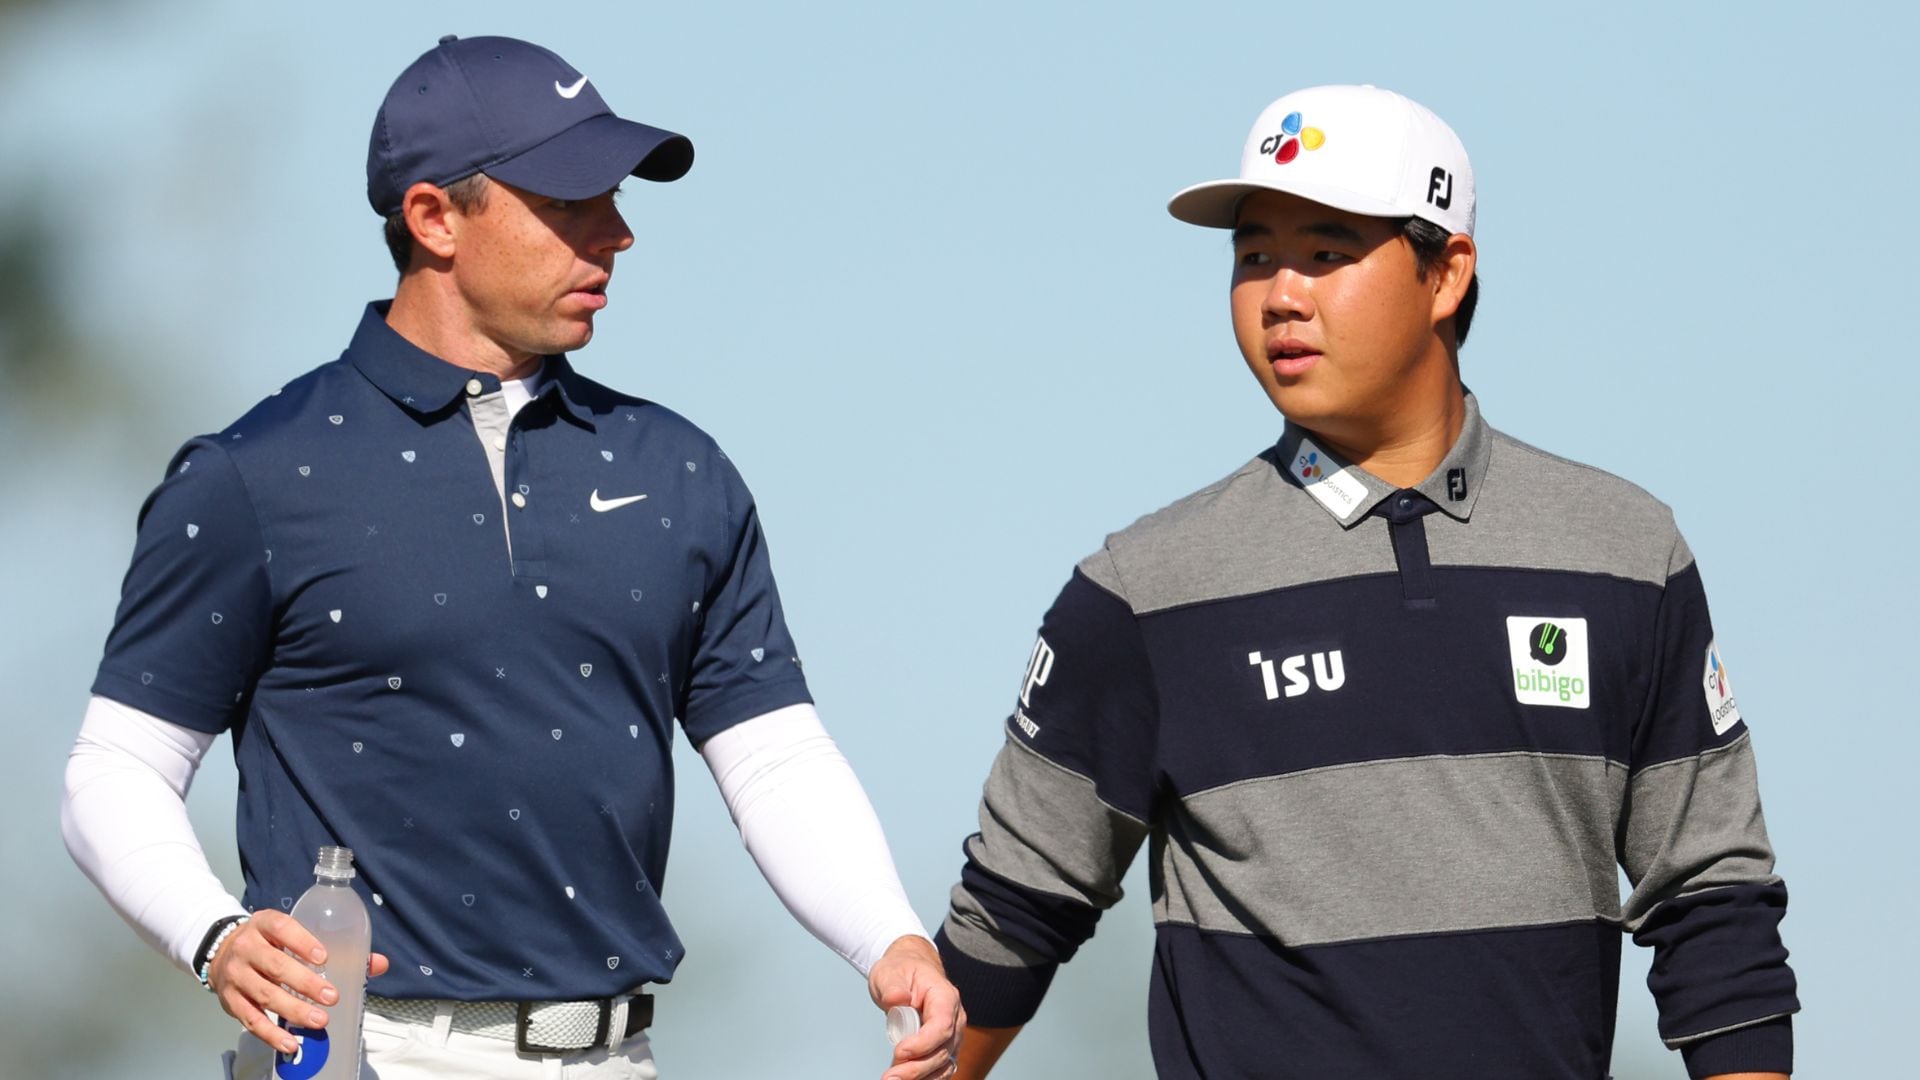 Tom Kim picks Rory McIlroy’s brain during CJ Cup round, says Kim will be ‘hell’ of player